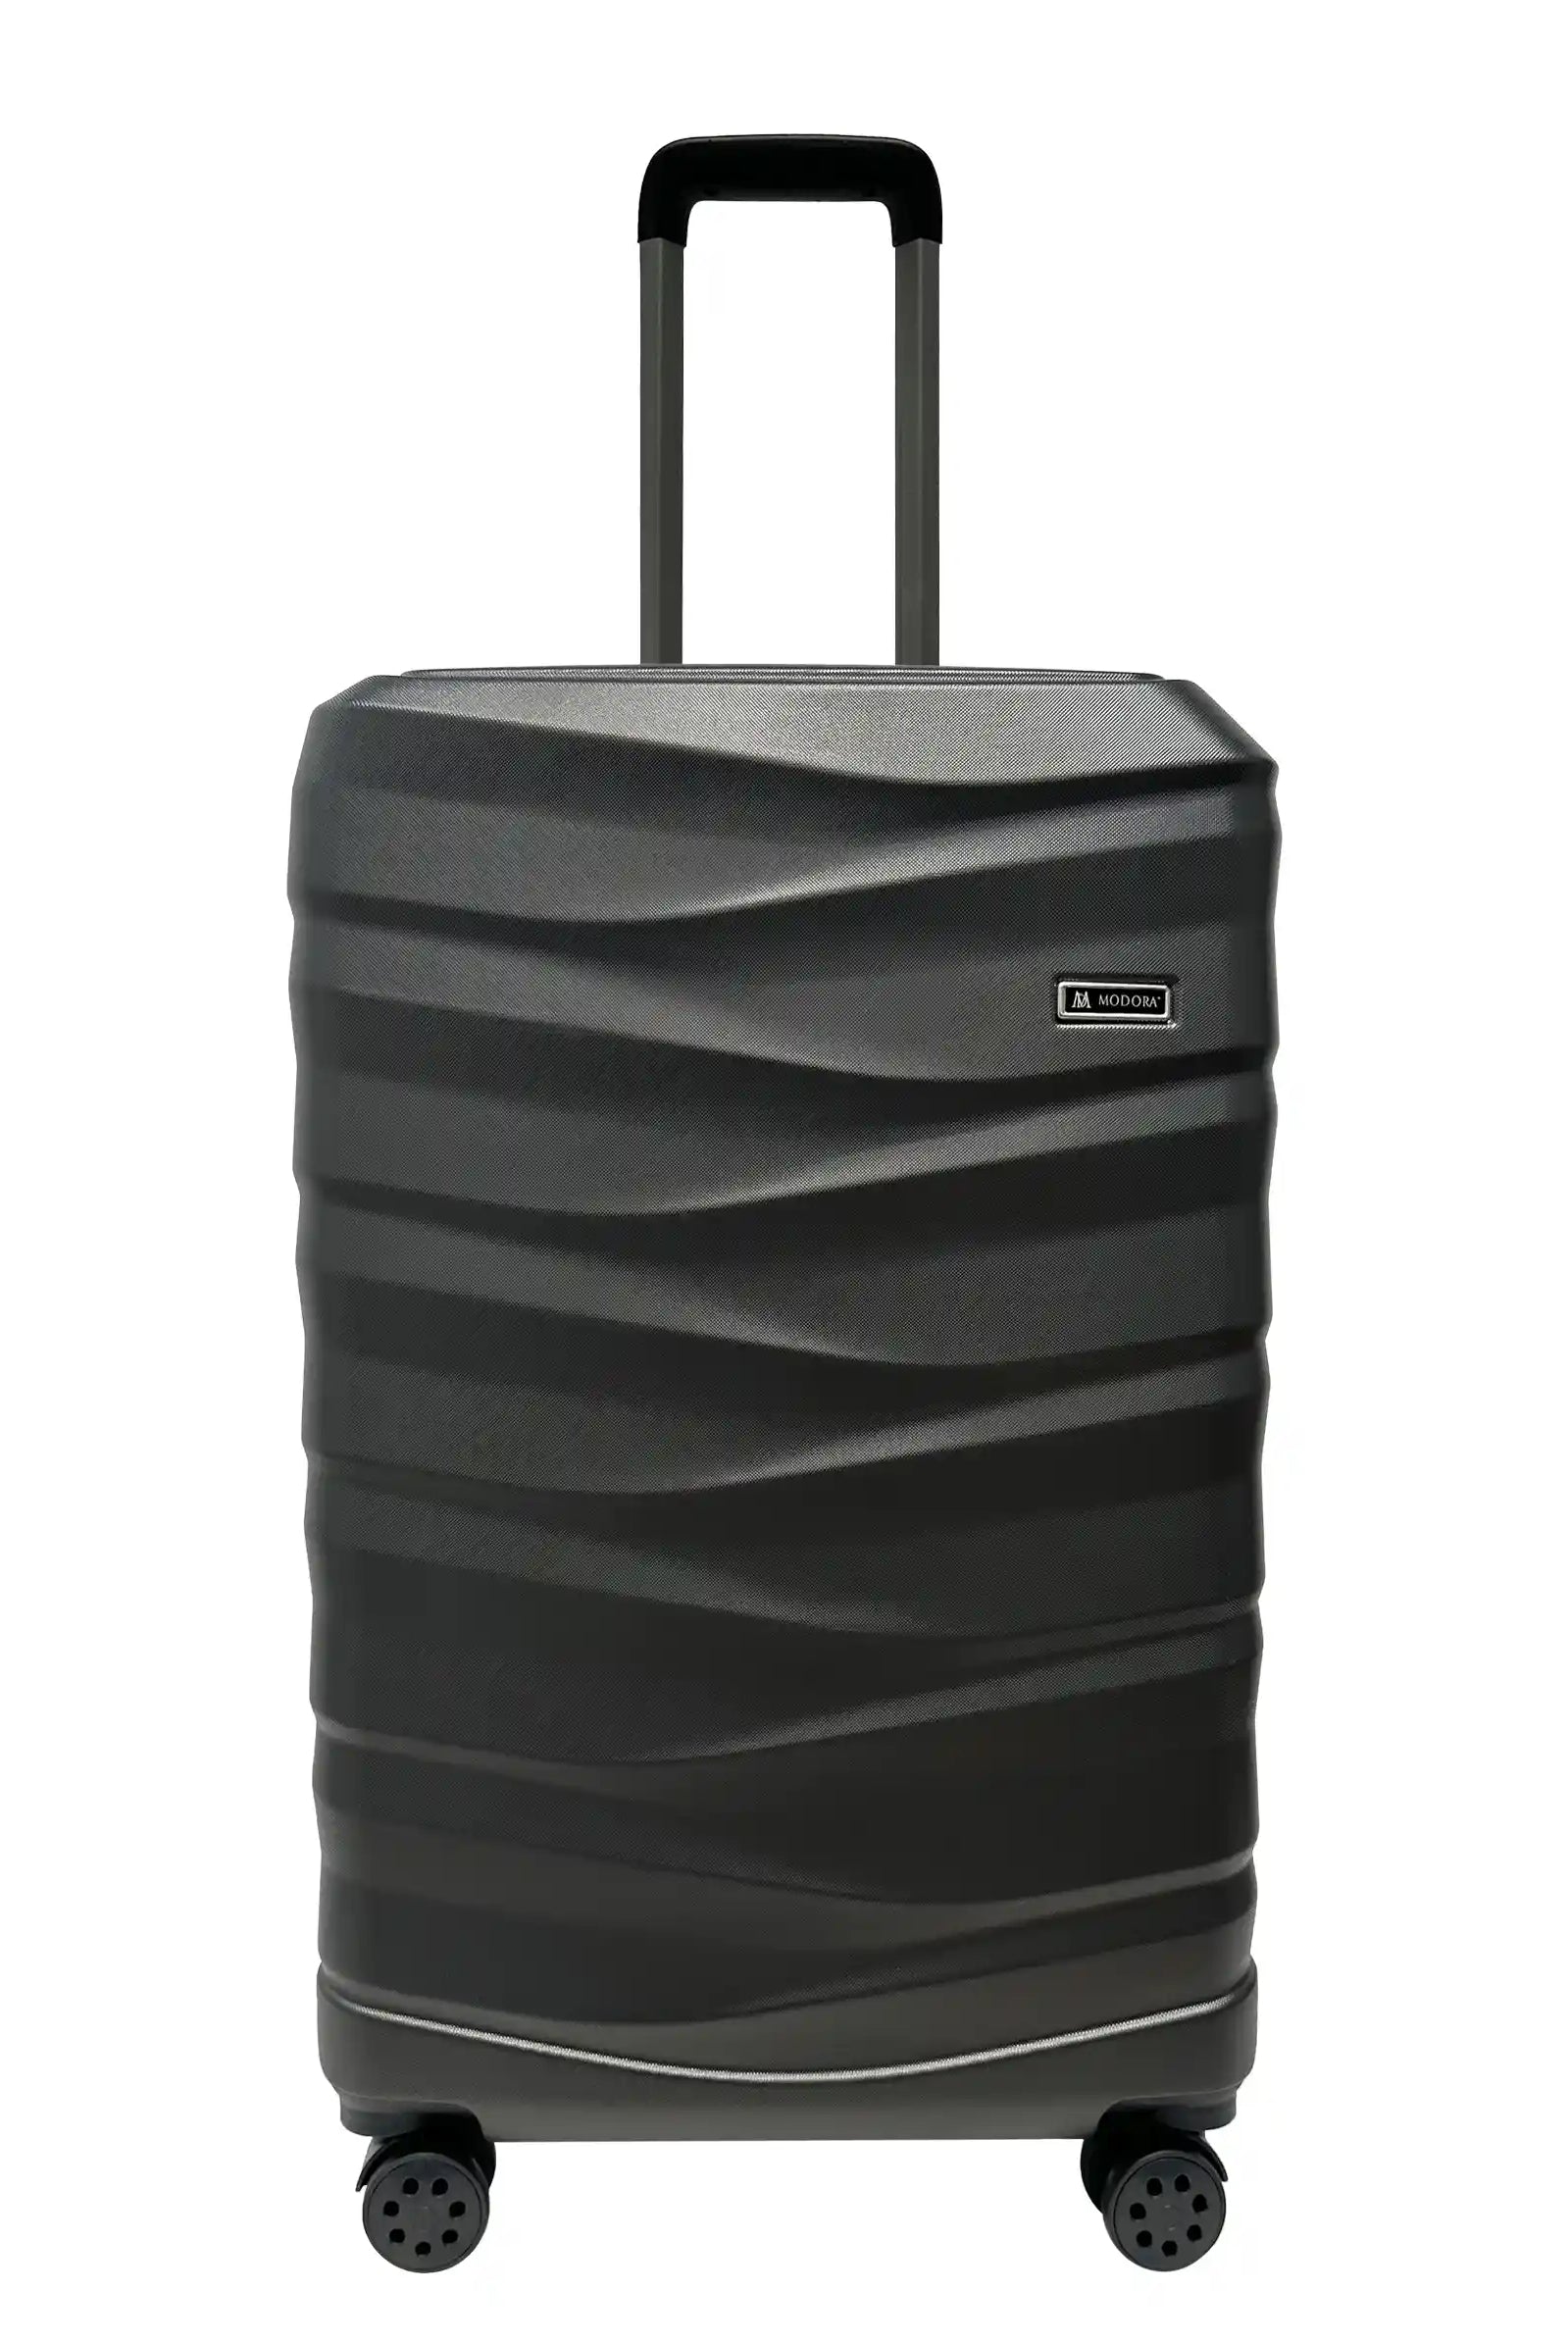 large suitcase with wheels